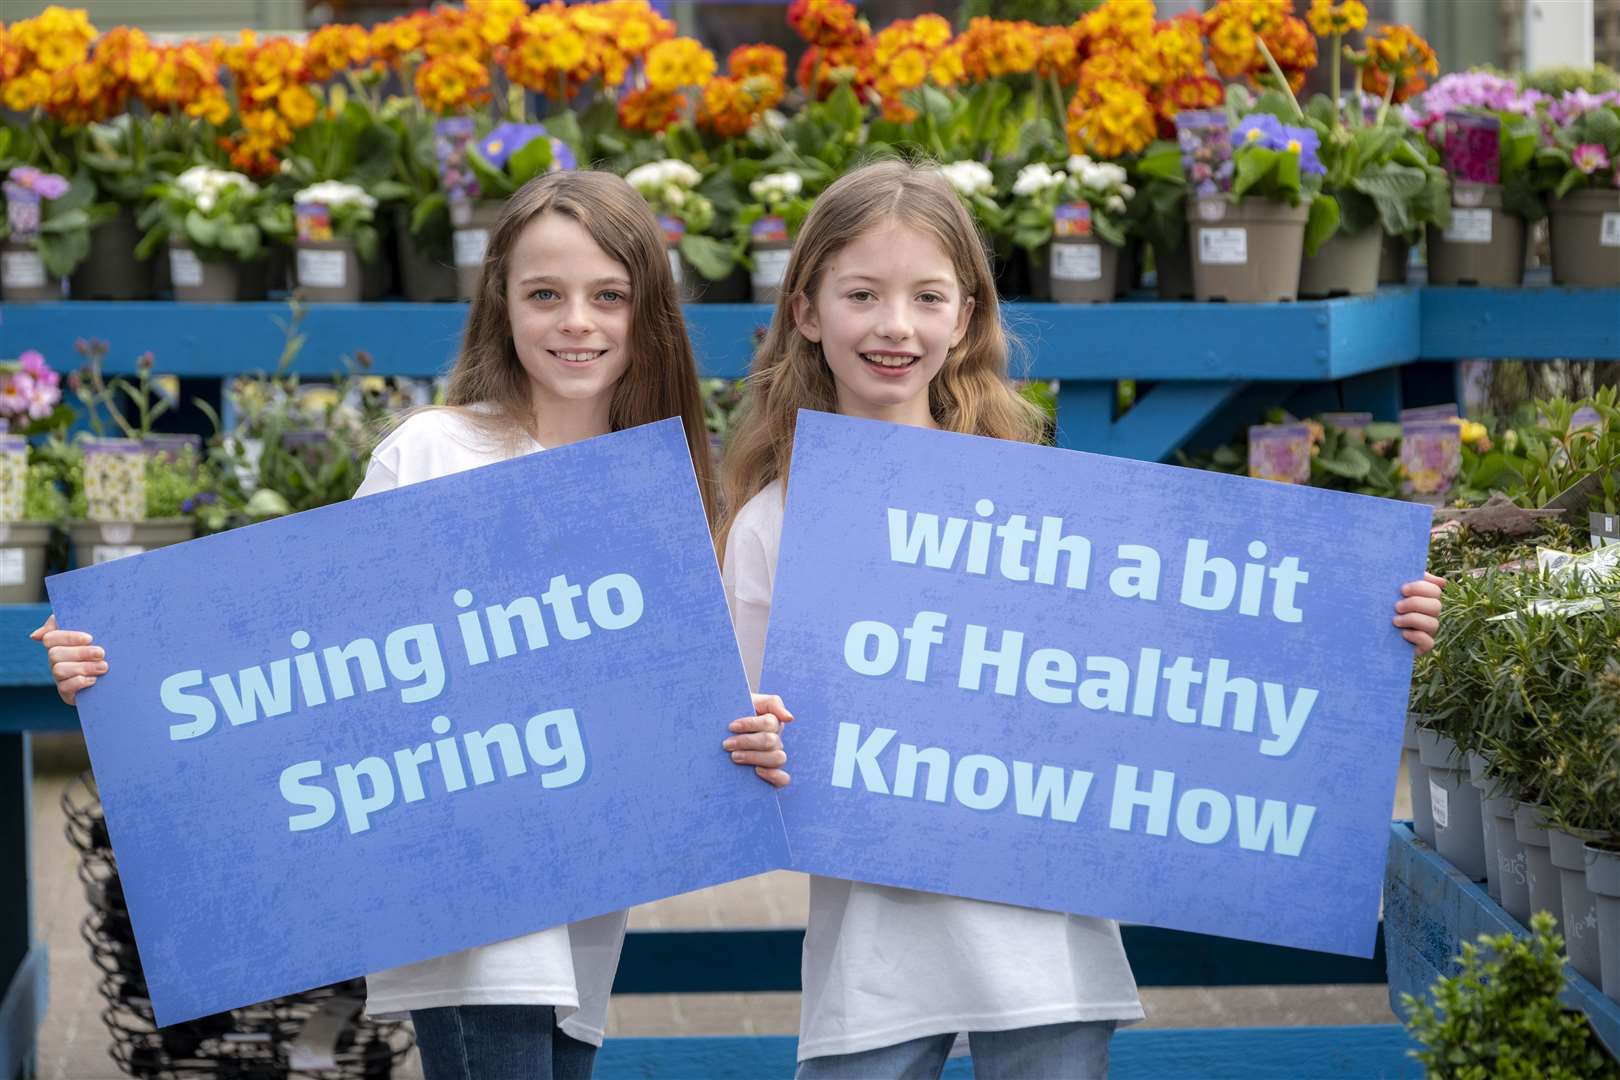 NHS24 aims to help people be prepared for any health issues this spring - particularly over the Easter holiday.